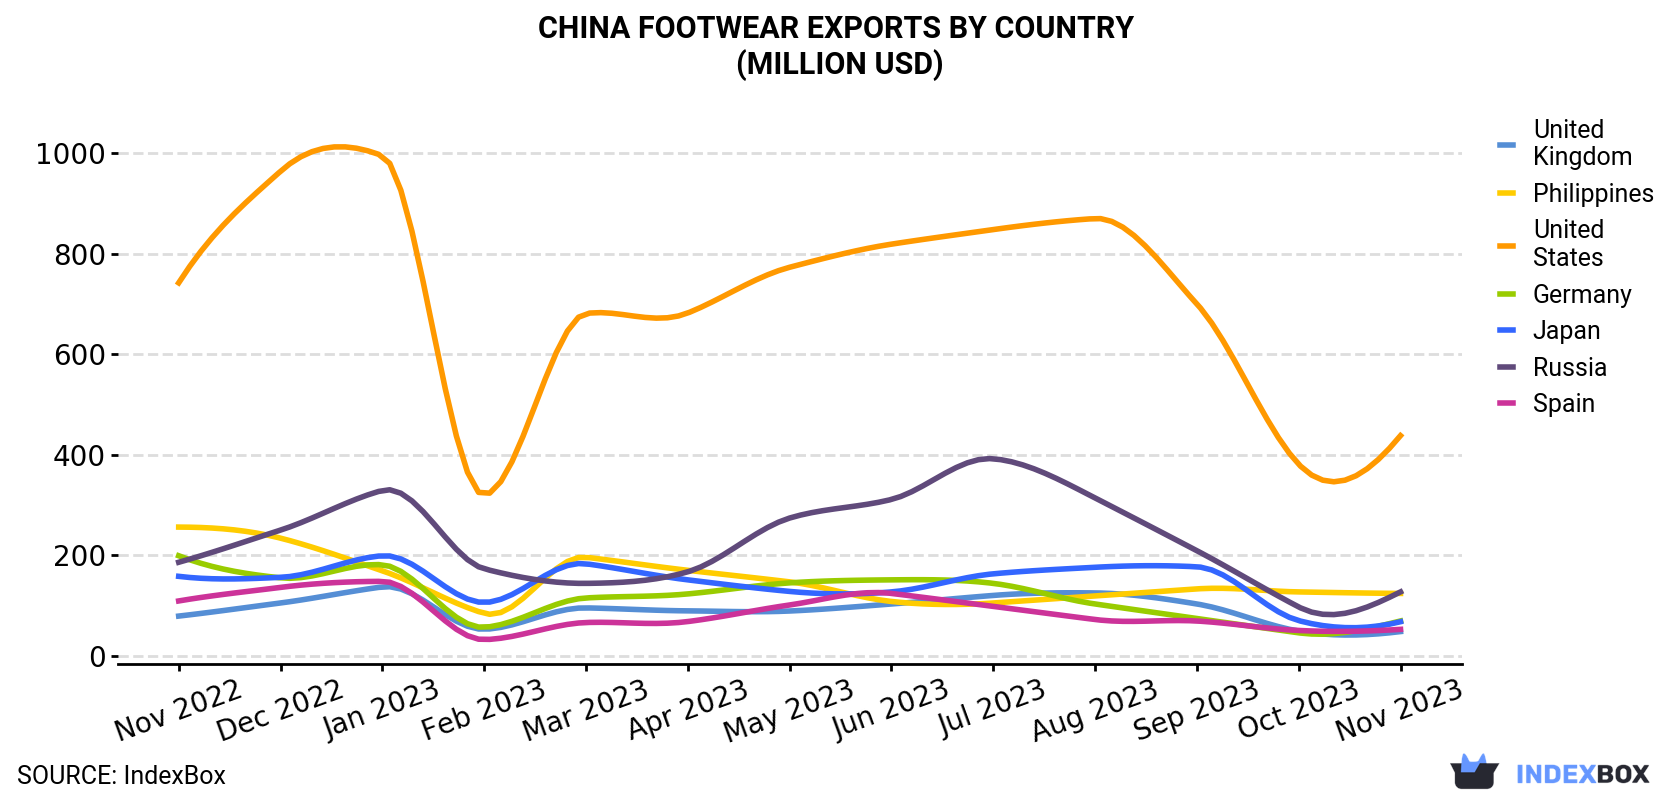 China Footwear Exports By Country (Million USD)